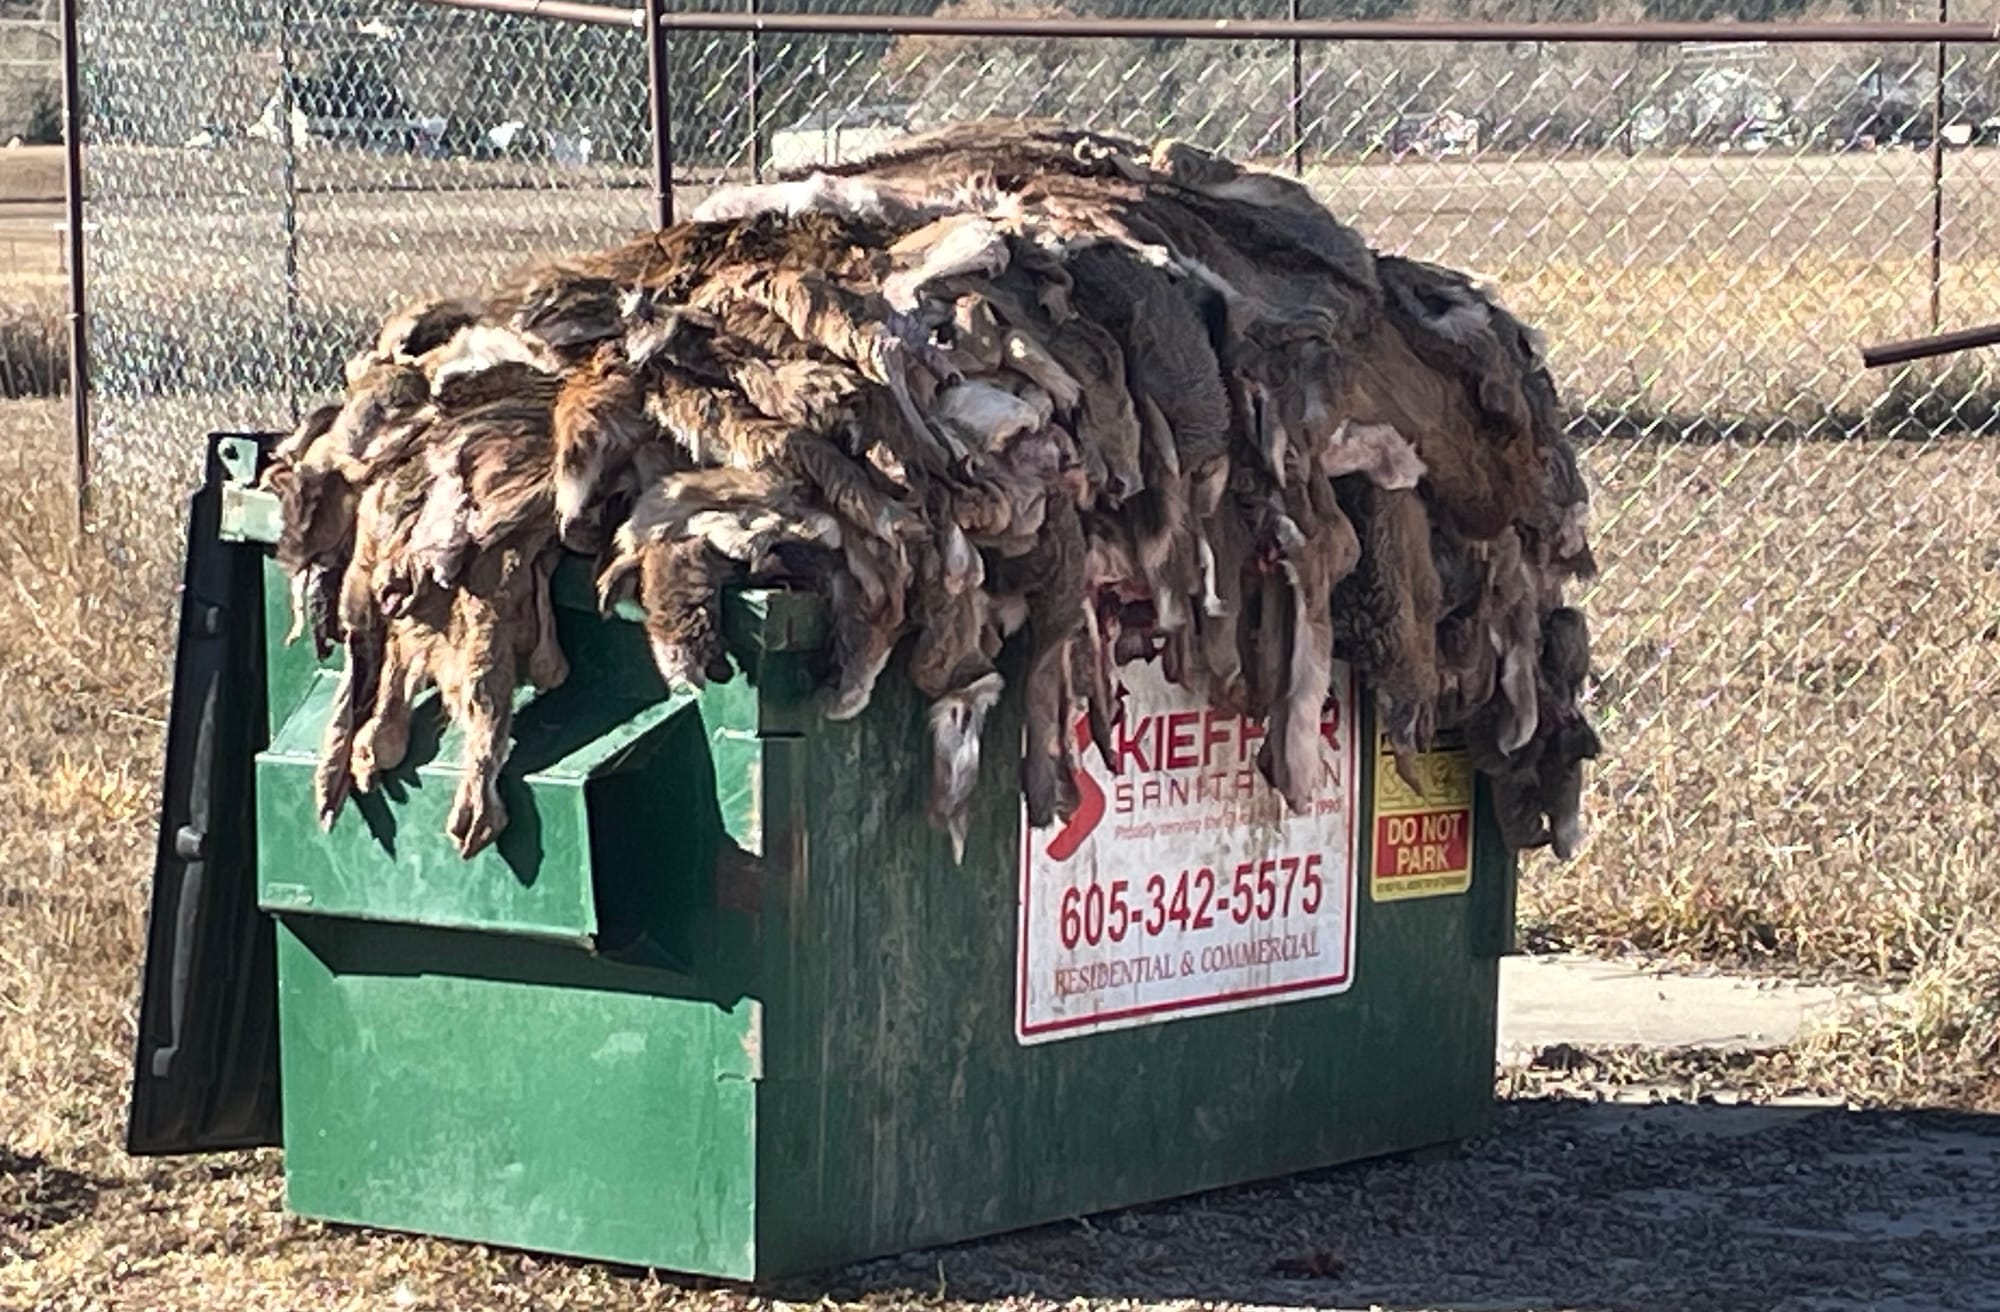 A large Dumpster overflows with deer hides outside the Cutting Edge Meat Market in Piedmont, S.D.